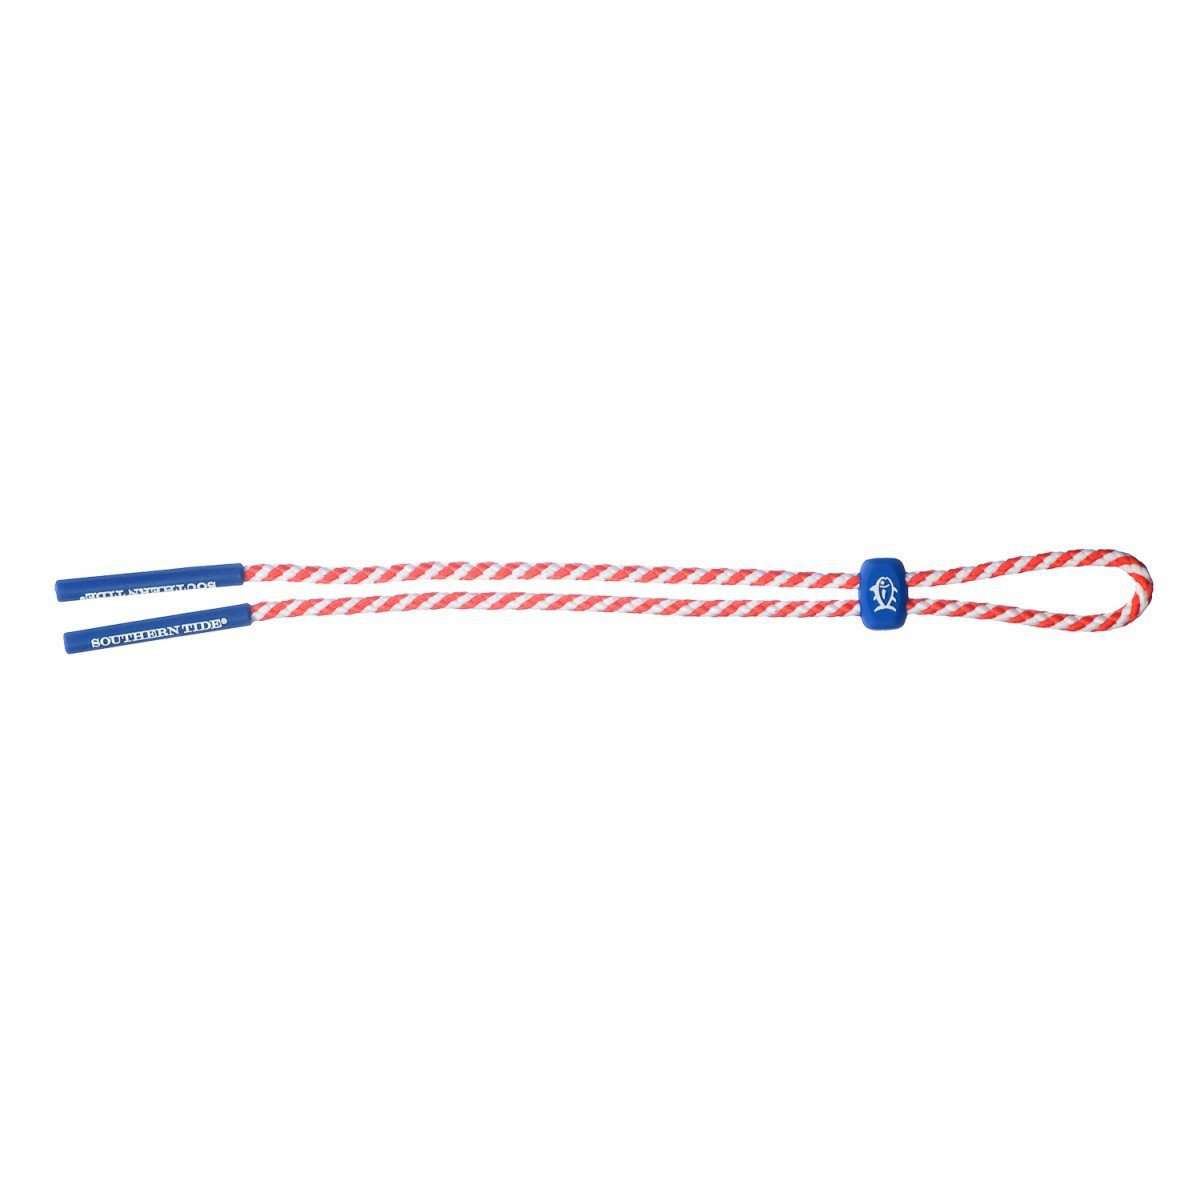 Rope Sunglass Straps in Orange by Southern Tide - Country Club Prep